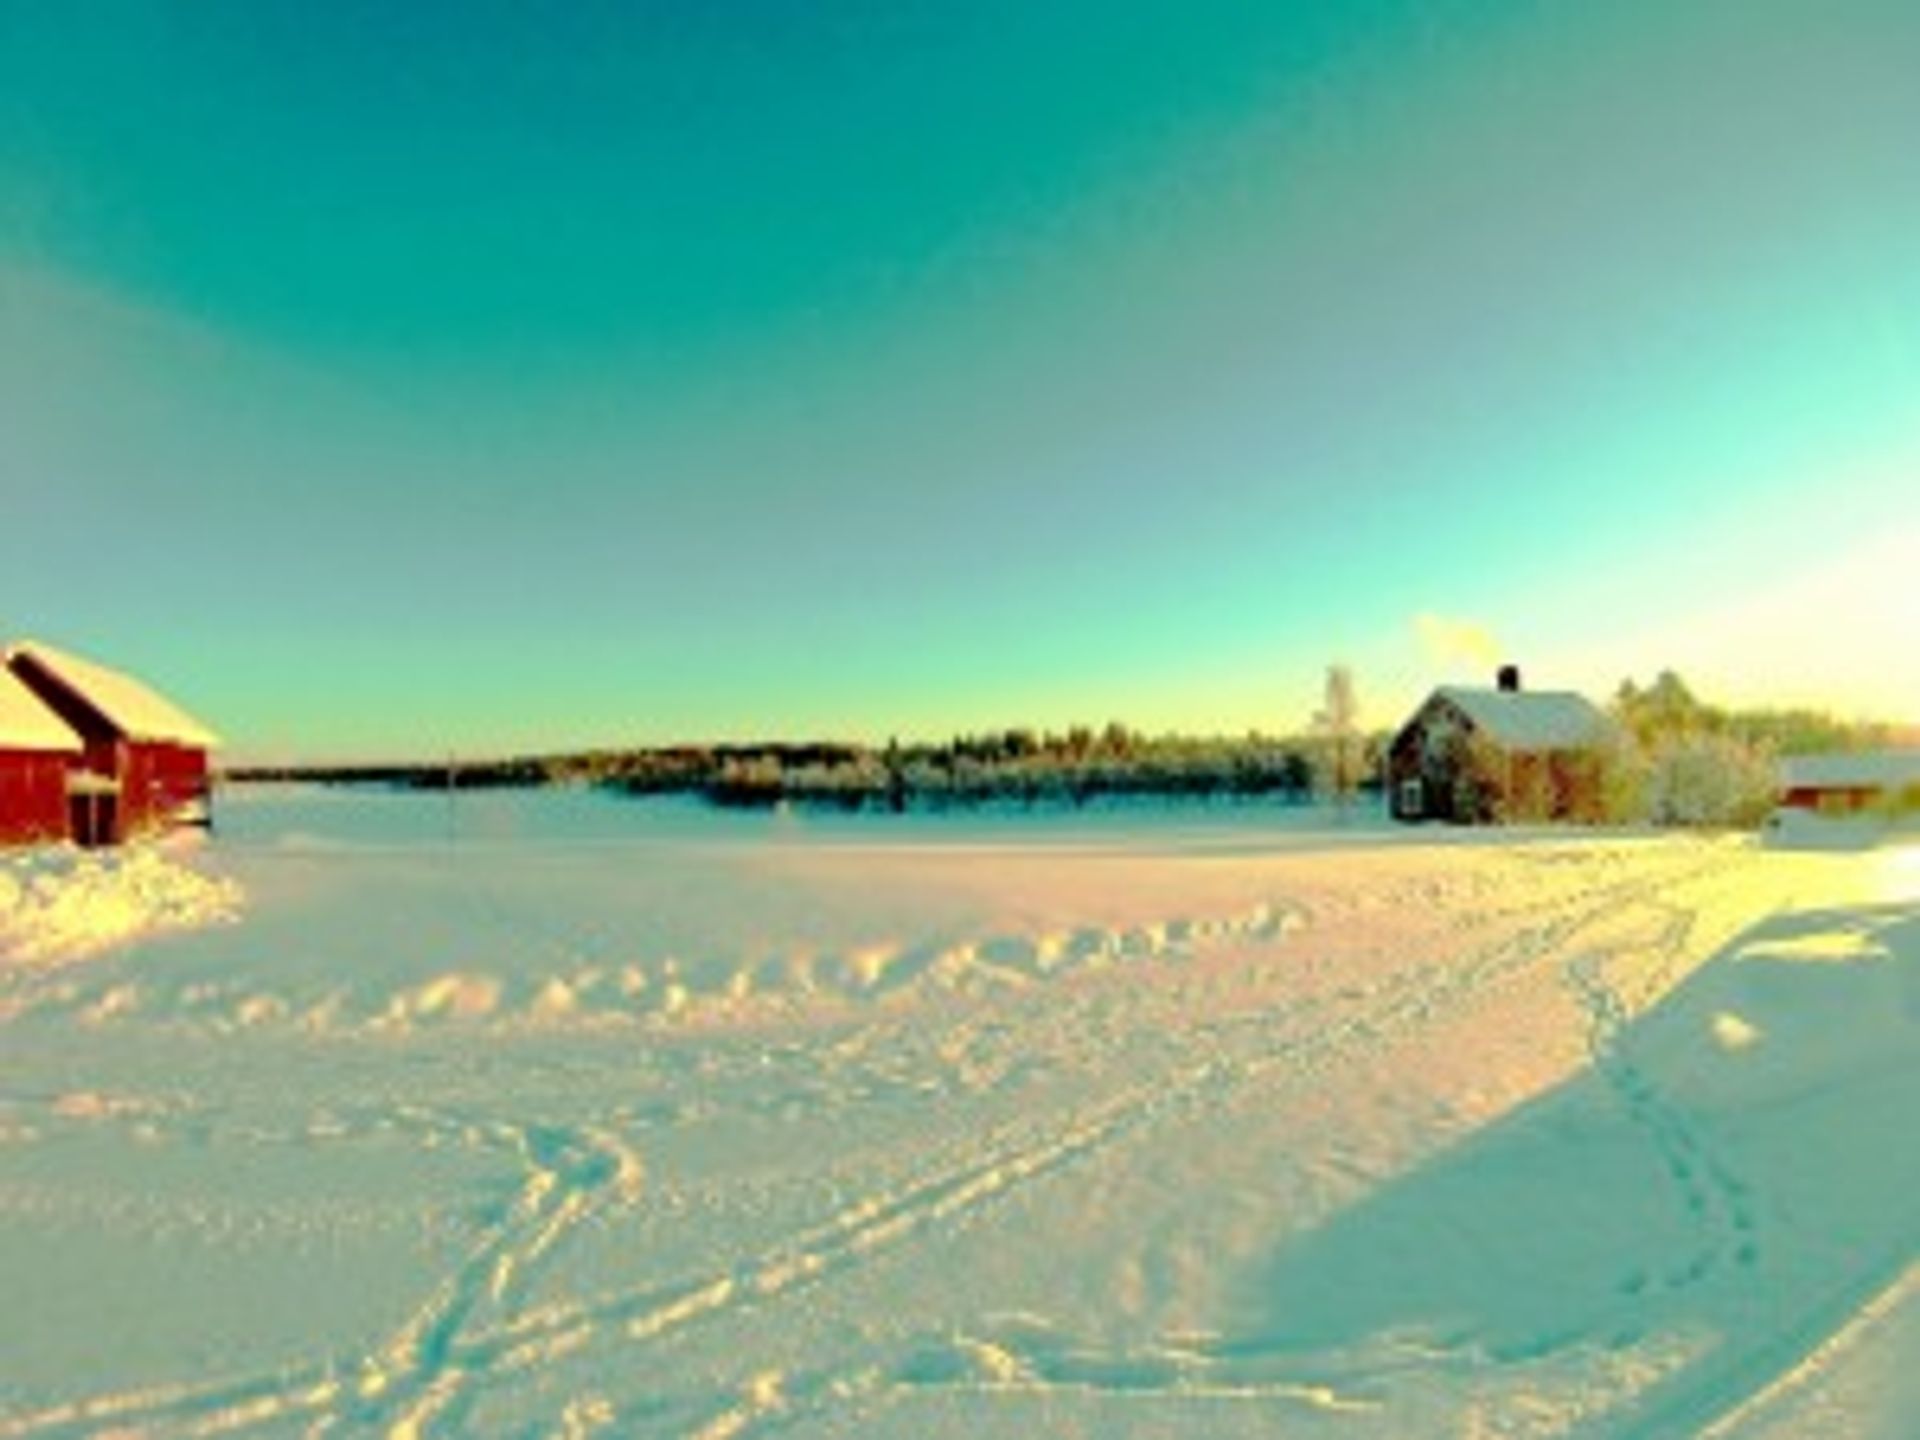 A landscape picture where the white snow takes up most of the picture and two red cottages are visible. The sun is shining and it is a green sky